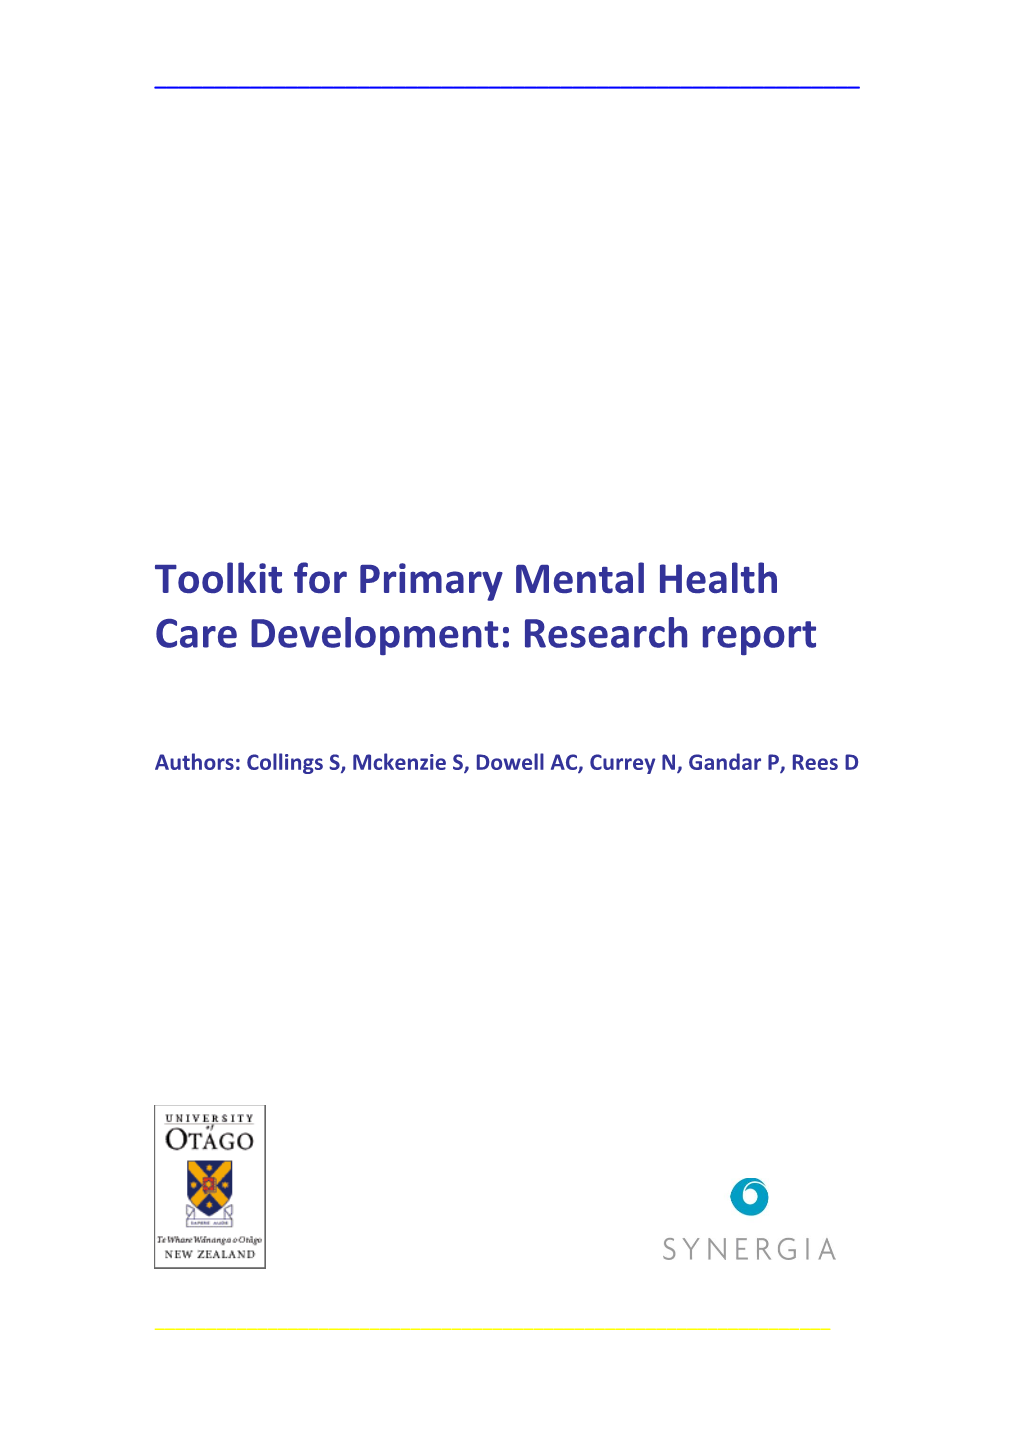 Toolkit for Primary Mental Health Care Development: Research Report